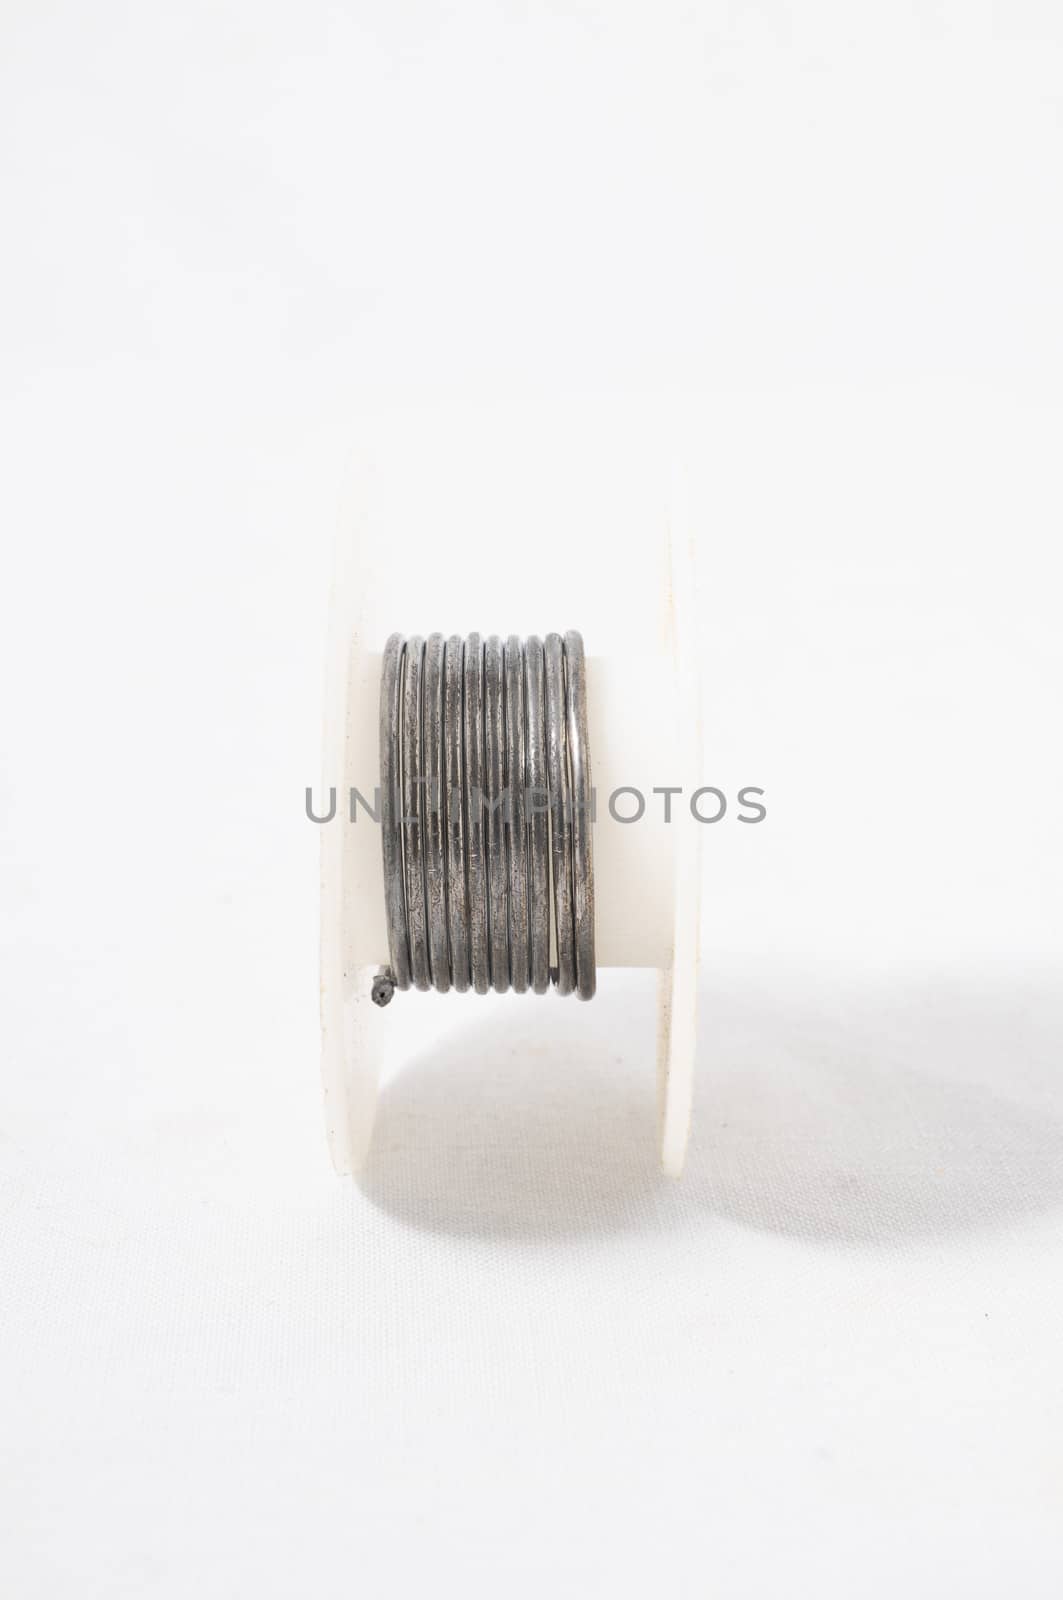 Roll of Twine isolated on a White Background